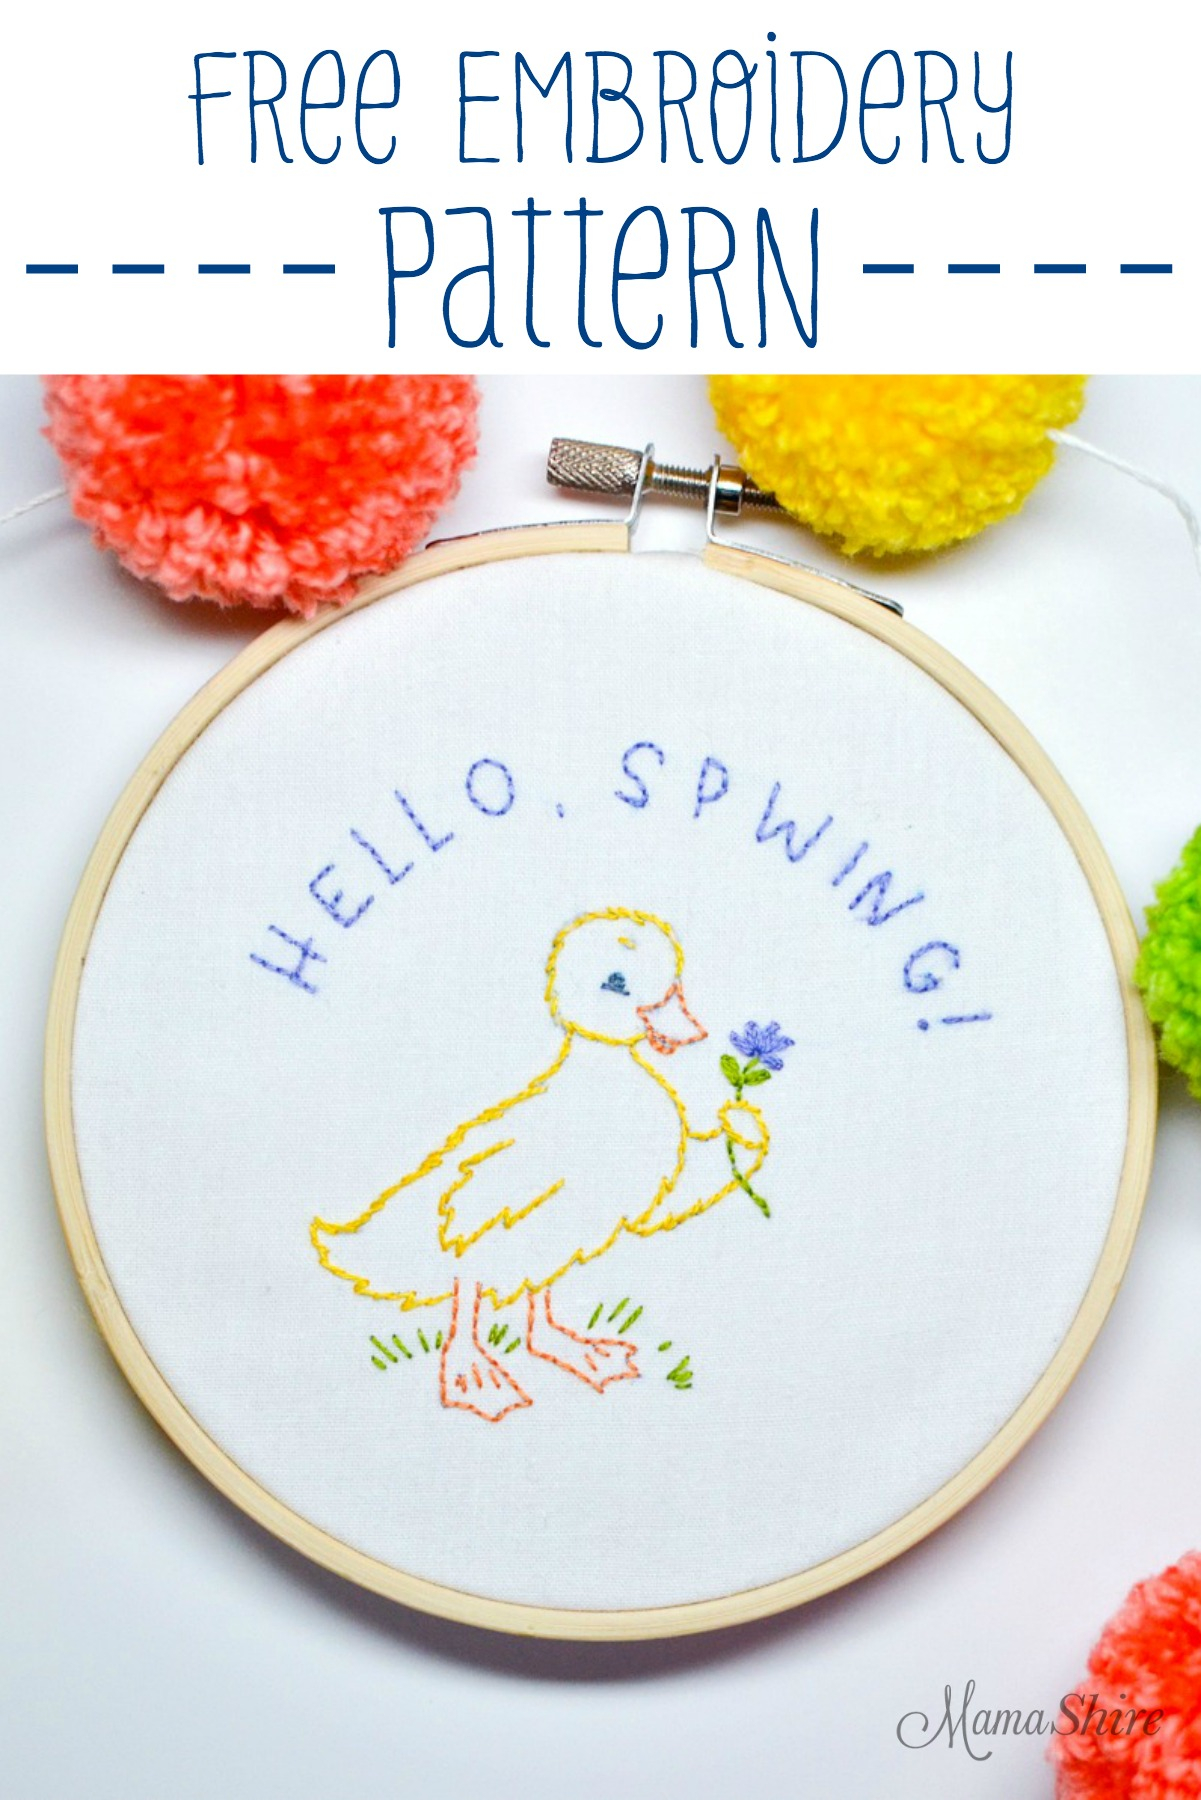 Embroidery Free Patterns Free Embroidery Pattern For Spring Hello Spwing Mamashire